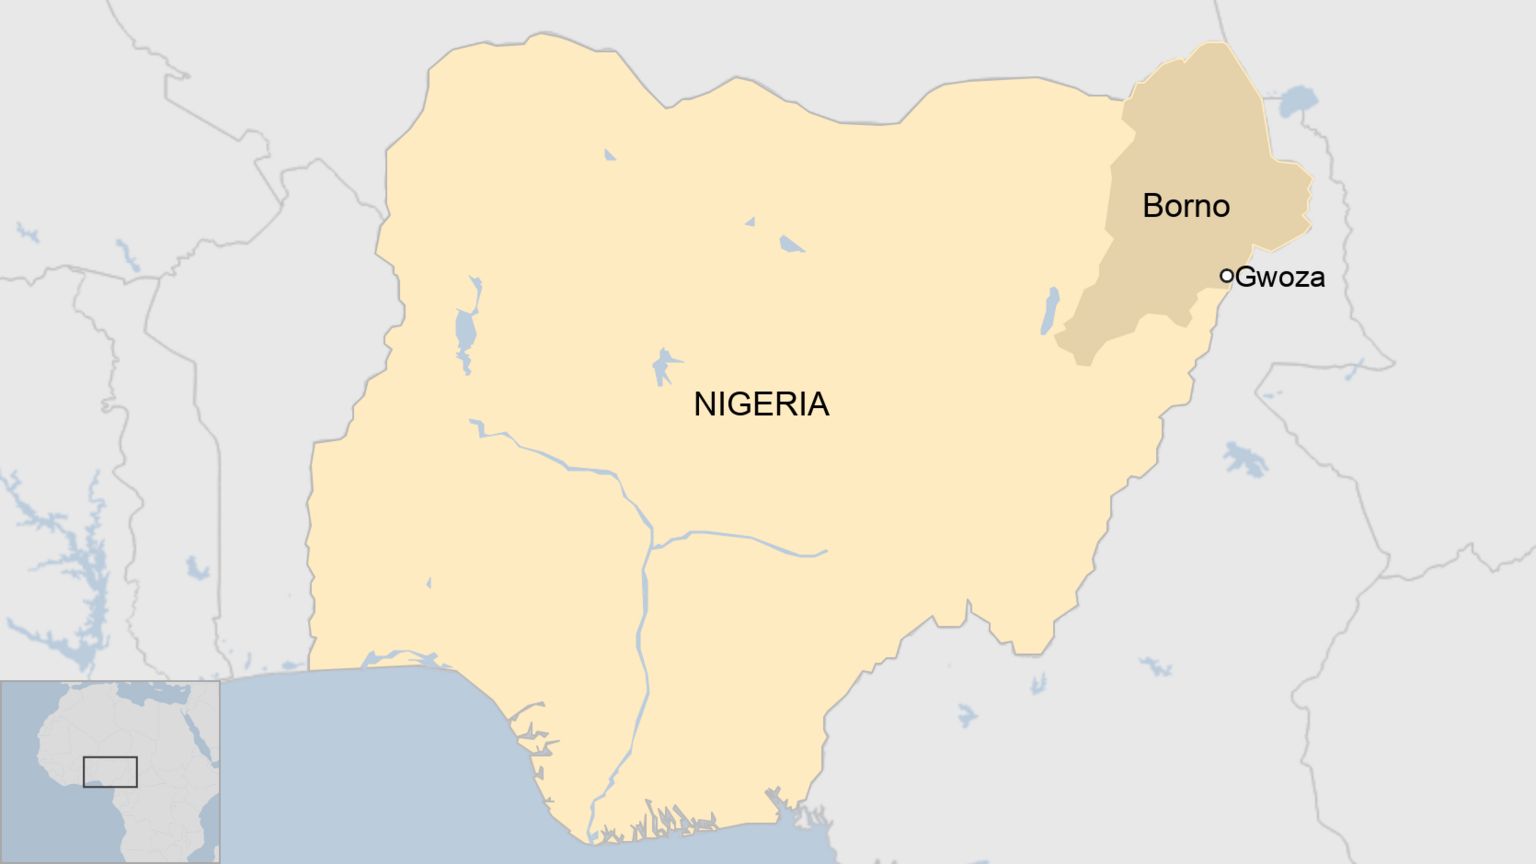 Map of Nigeria, highlighting state of Borno and town of Gwoza